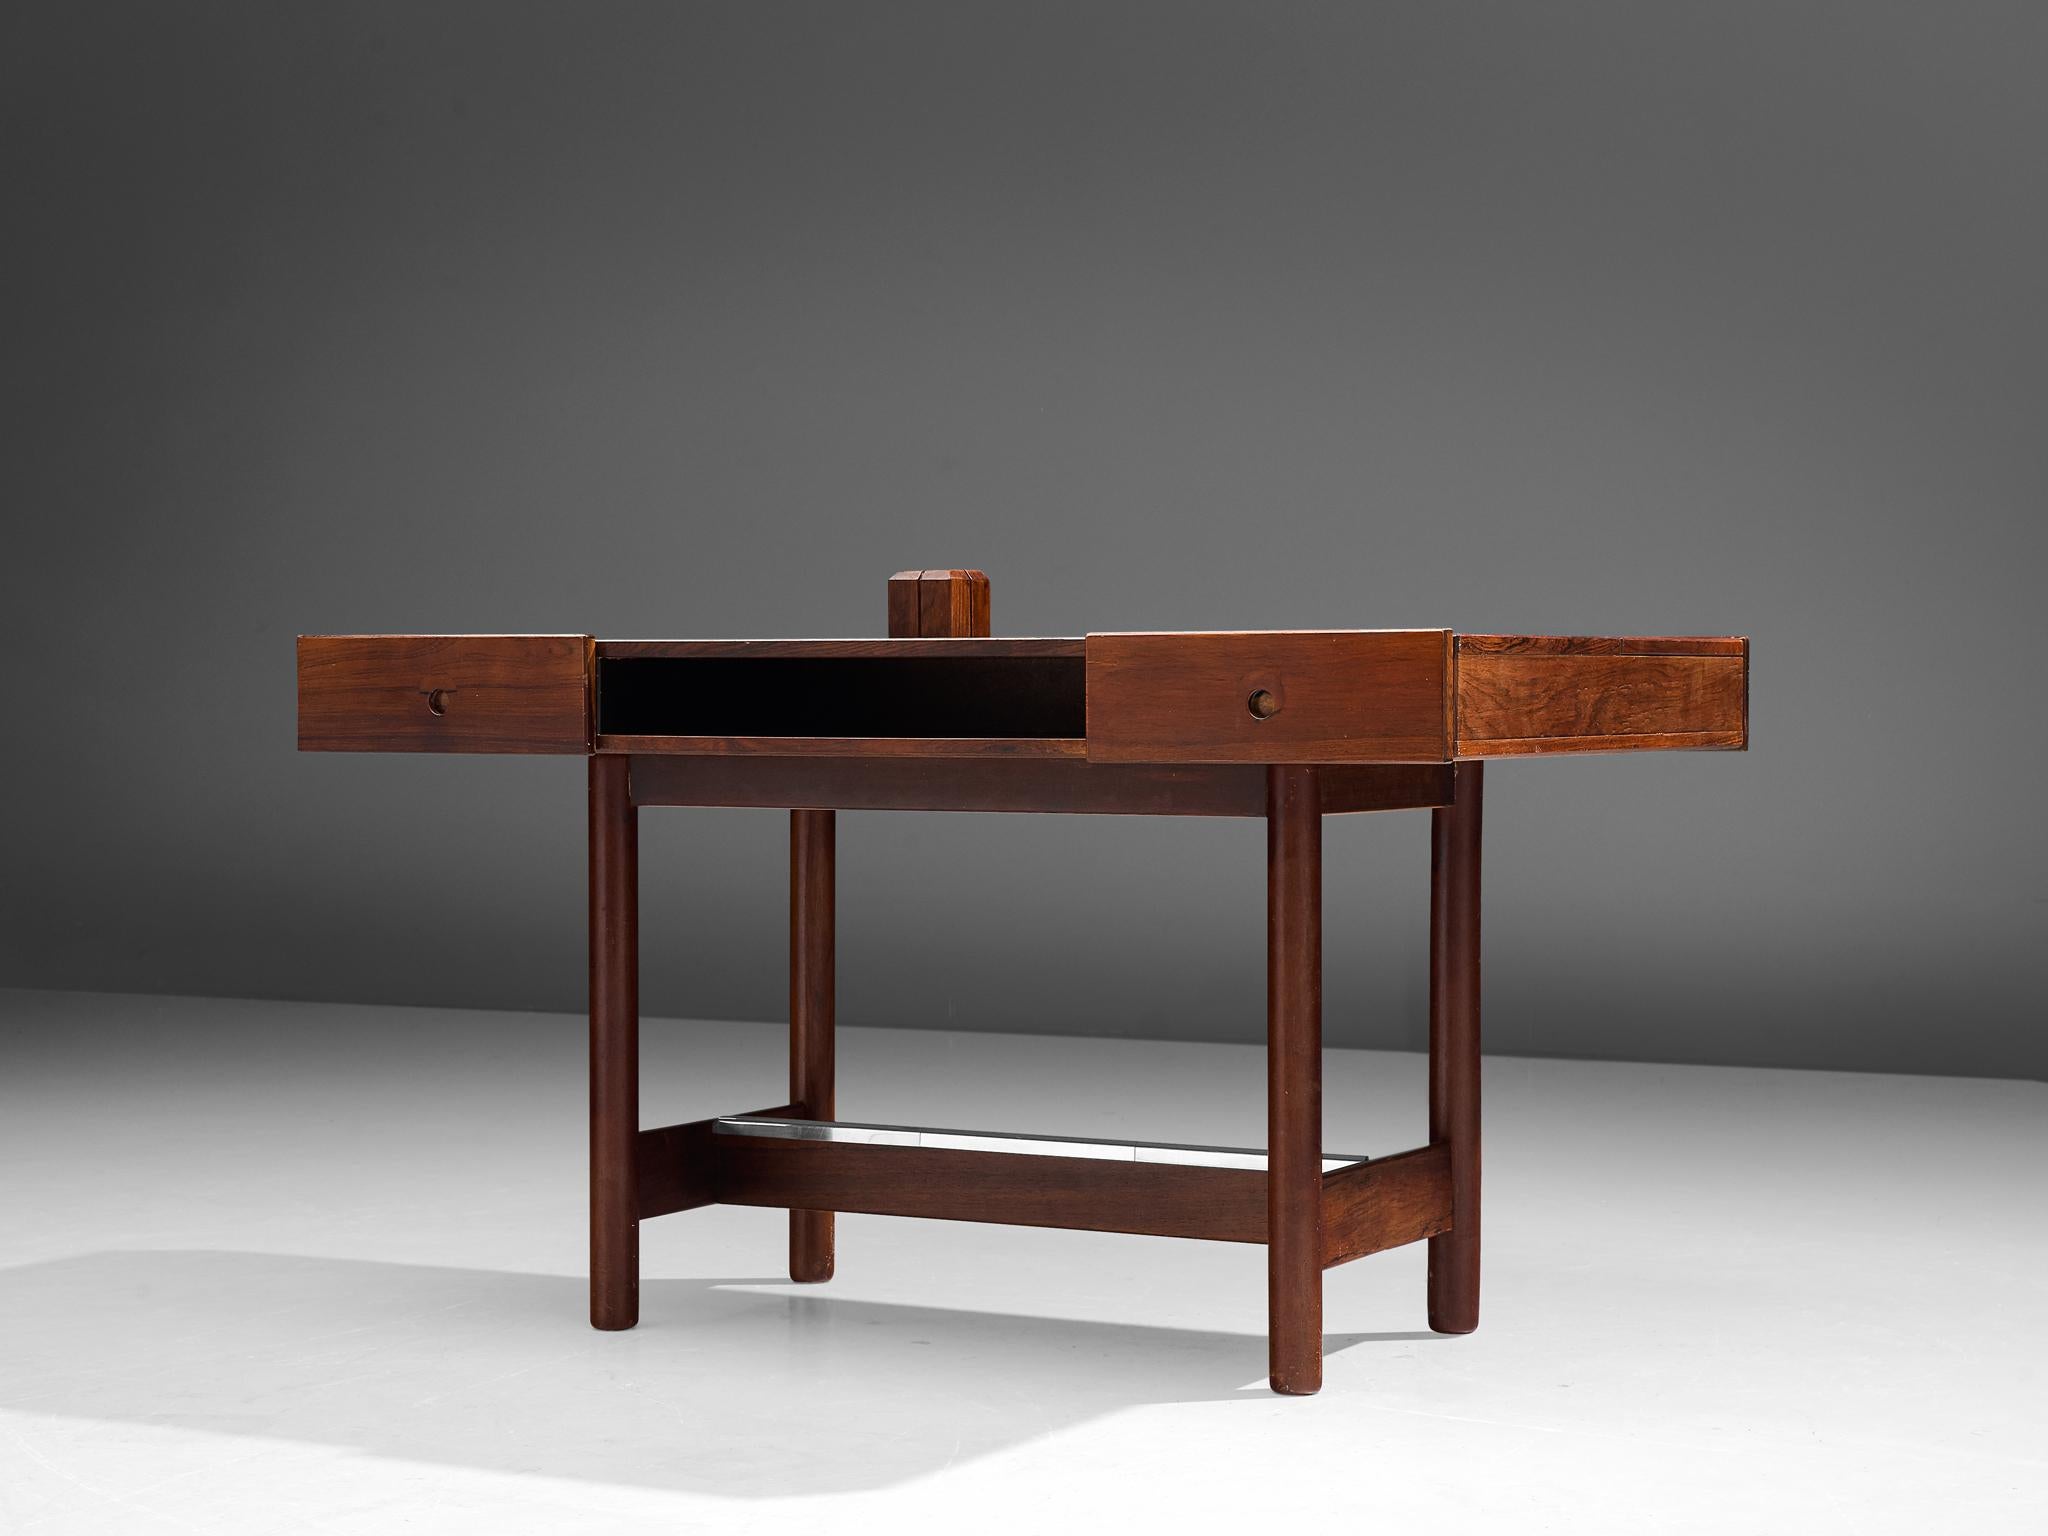 Desk, rosewood and metal, Denmark, 1960s

Scandinavian Modern desk in the manner of Peter Hvidt and Orla Mølgaard. Simplistic and functional design, for instance the drawers that are placed below the desk top. Between the drawers is an open